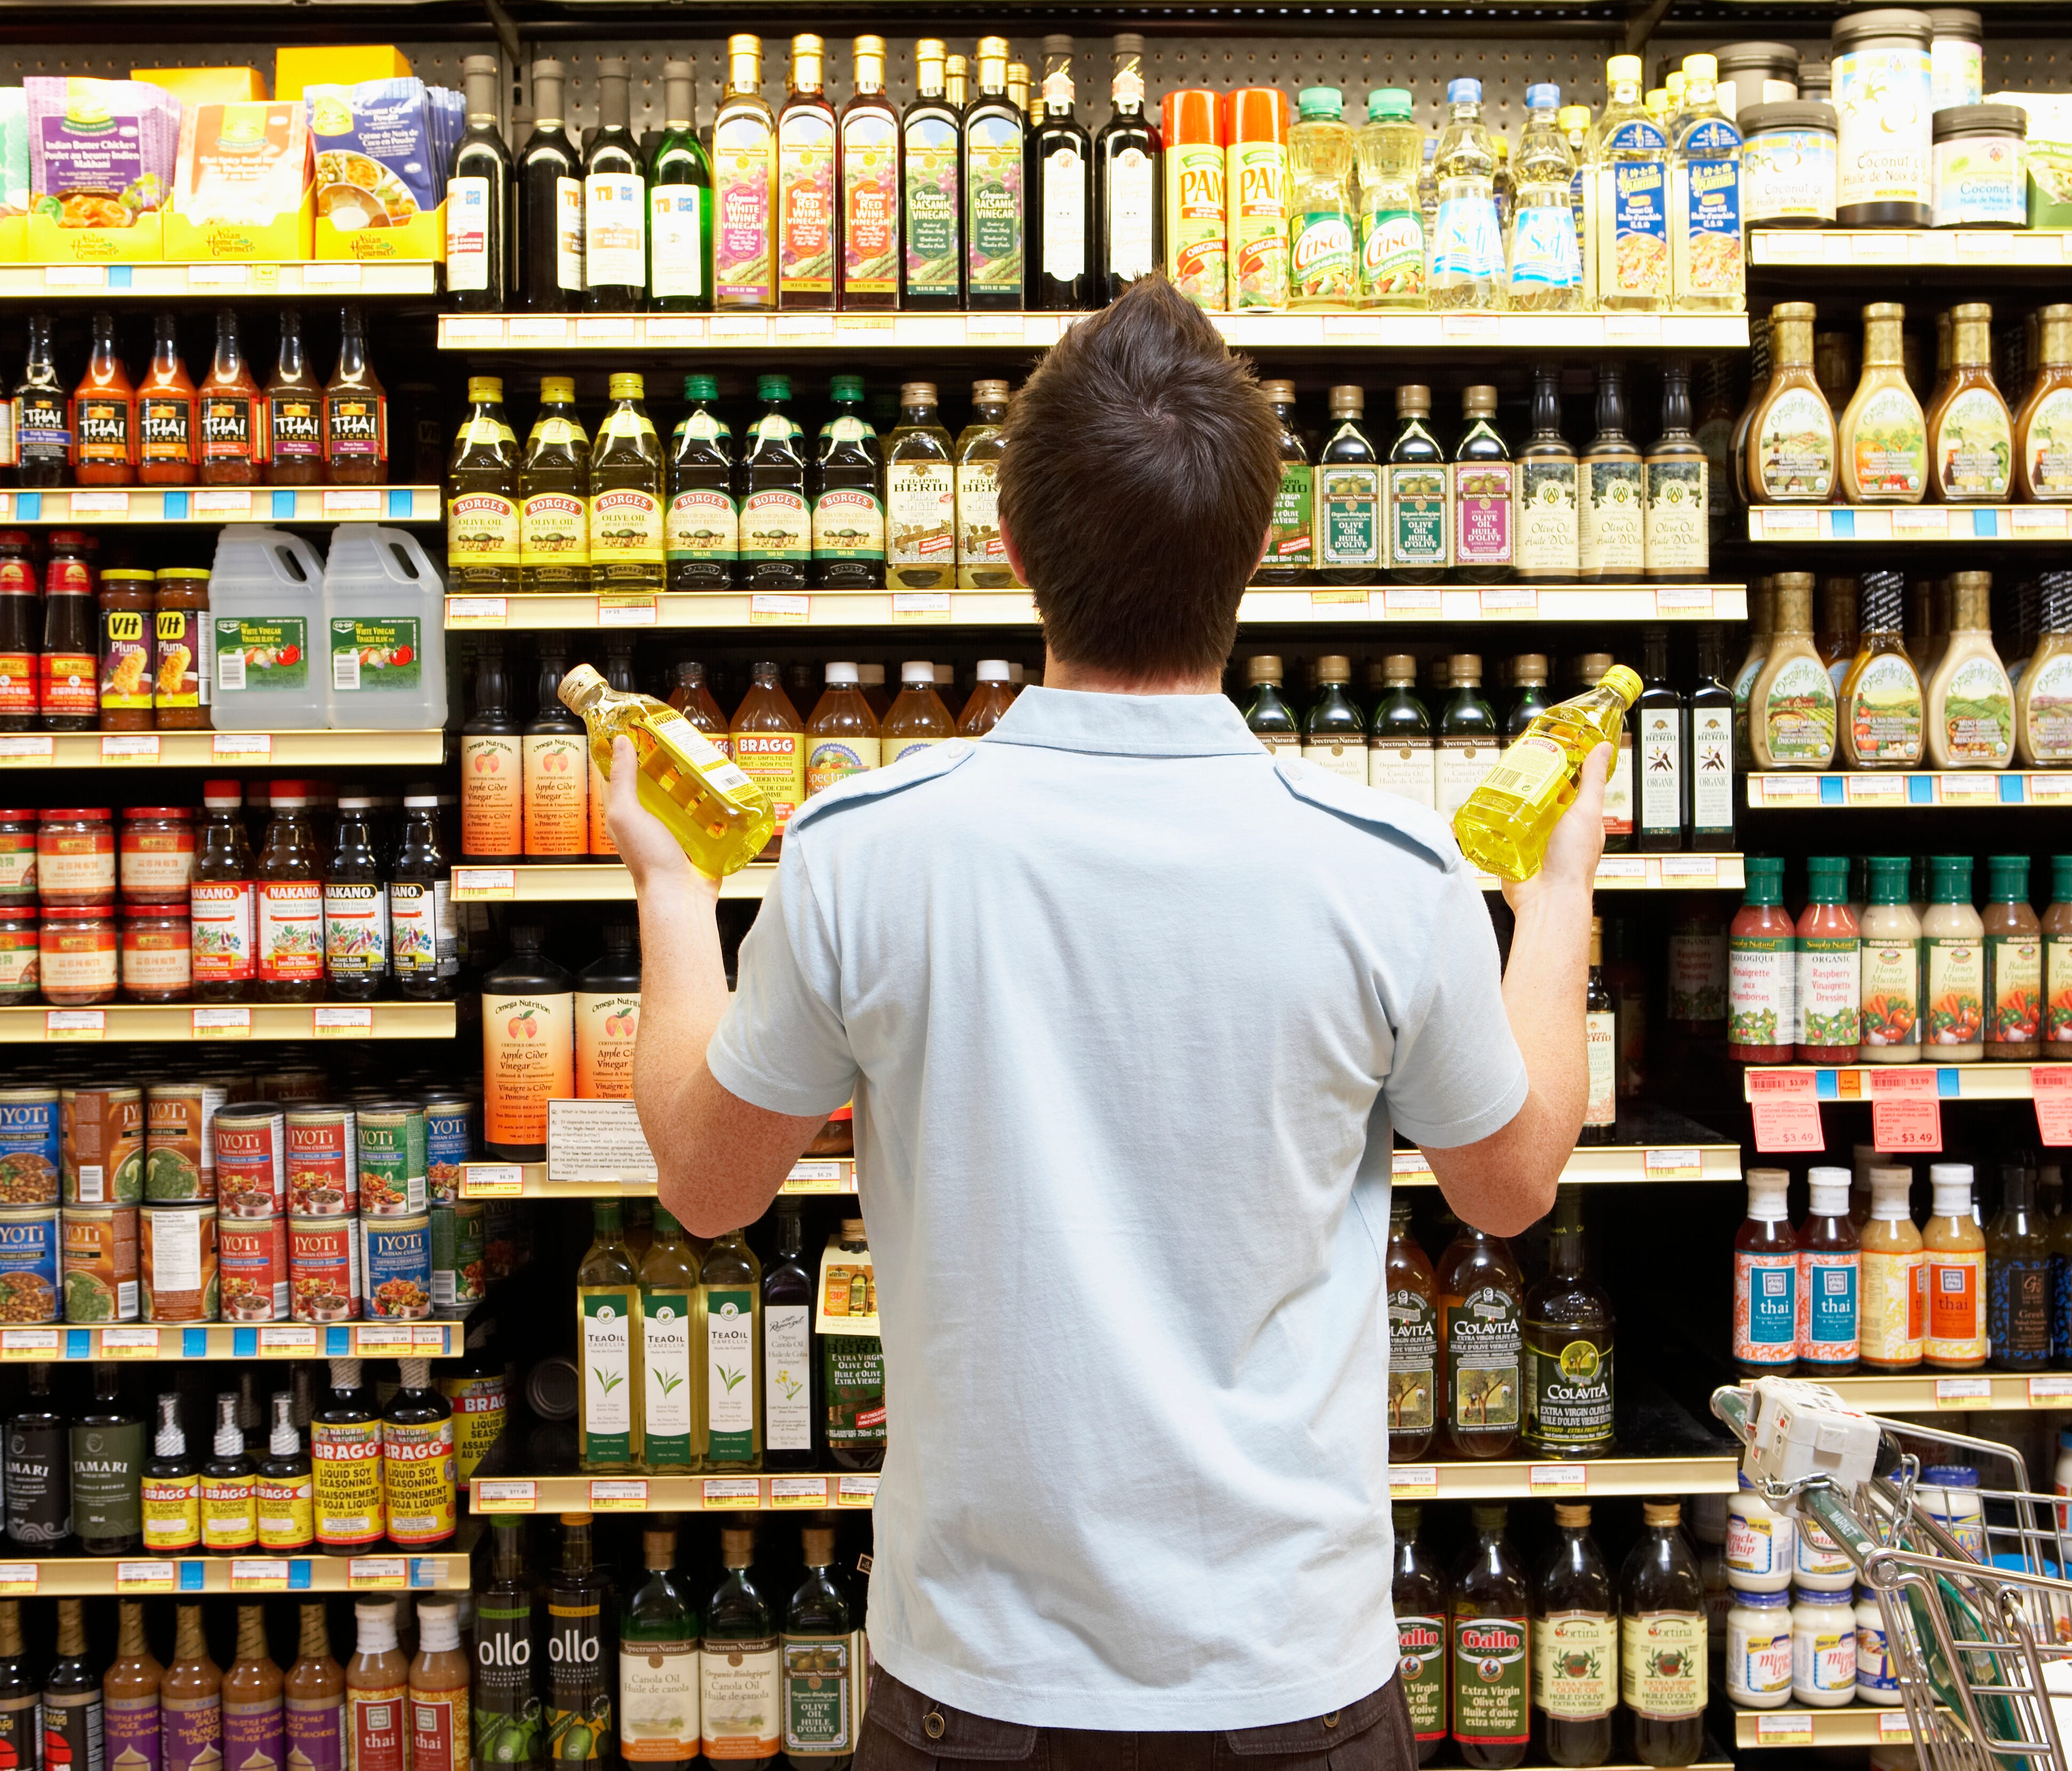 With so much conflicting information about cooking oils, it's easy to be confused.